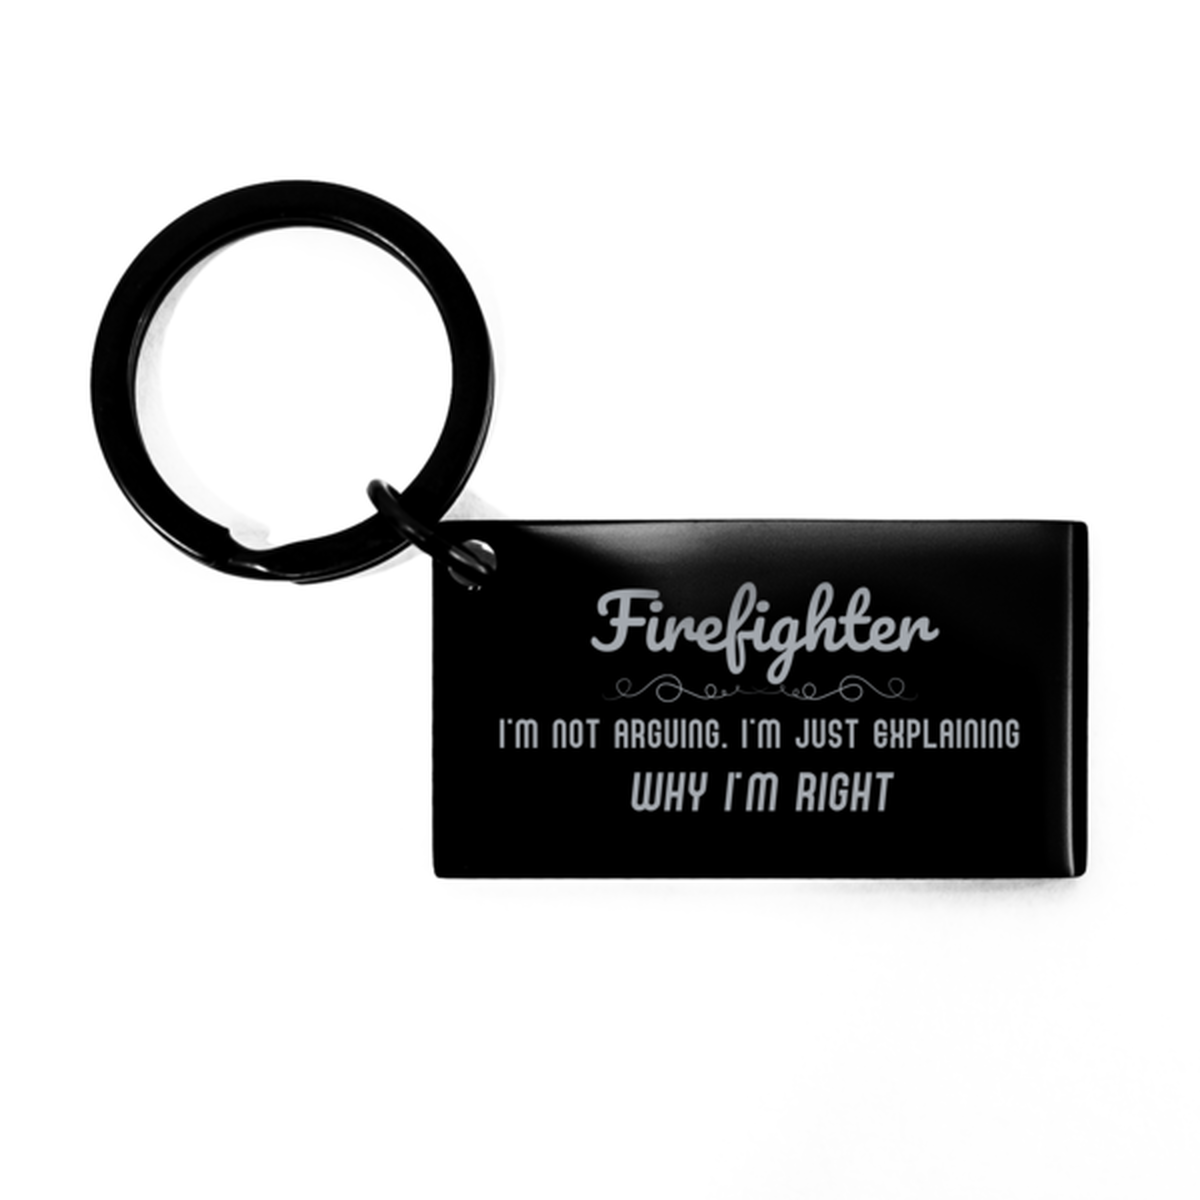 Firefighter I'm not Arguing. I'm Just Explaining Why I'm RIGHT Keychain, Funny Saying Quote Firefighter Gifts For Firefighter Graduation Birthday Christmas Gifts for Men Women Coworker